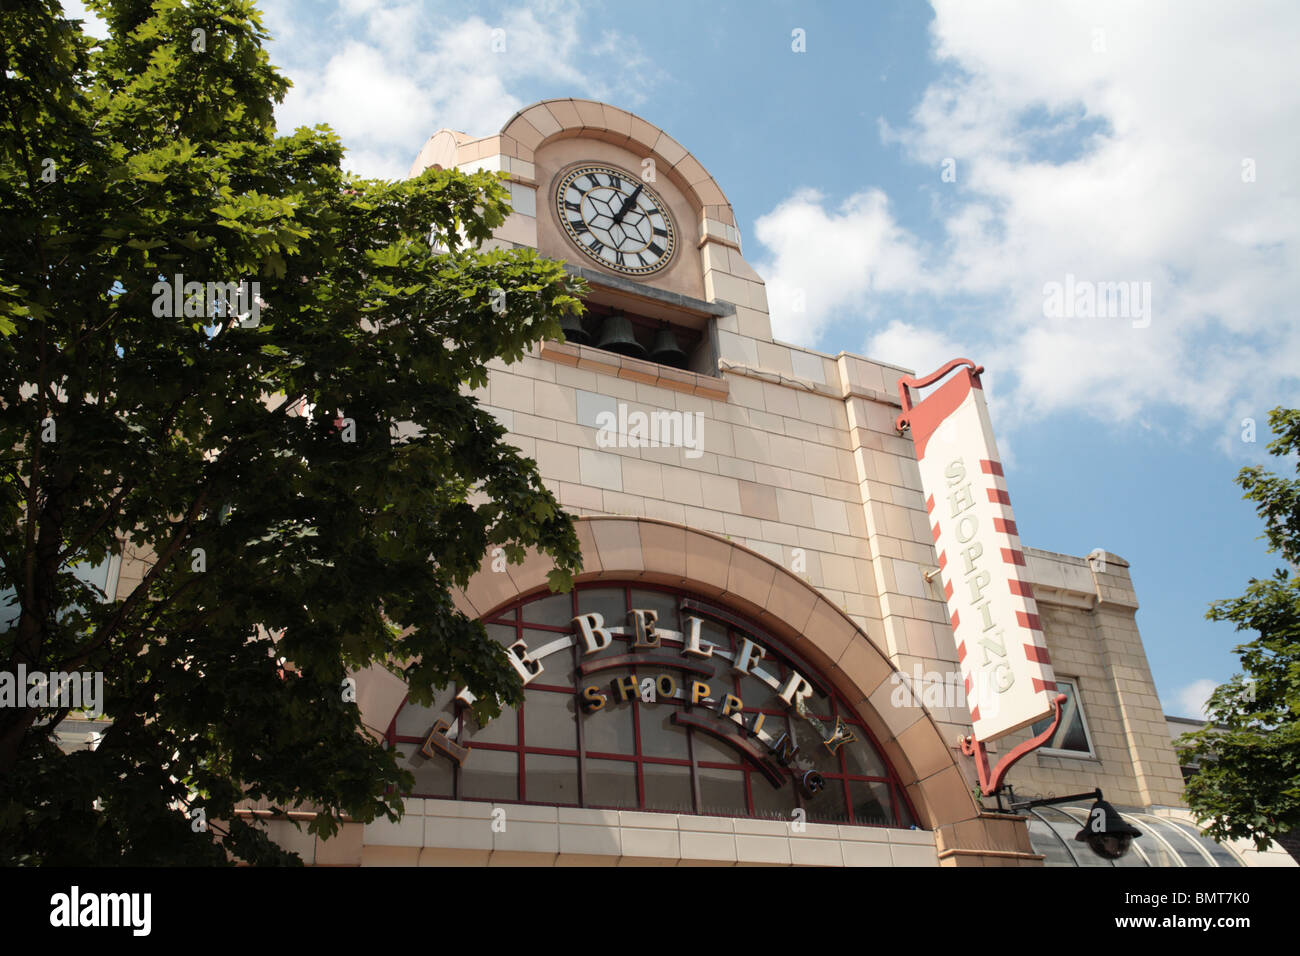 The Belfry Shopping Centre, Redhill Stock Photo